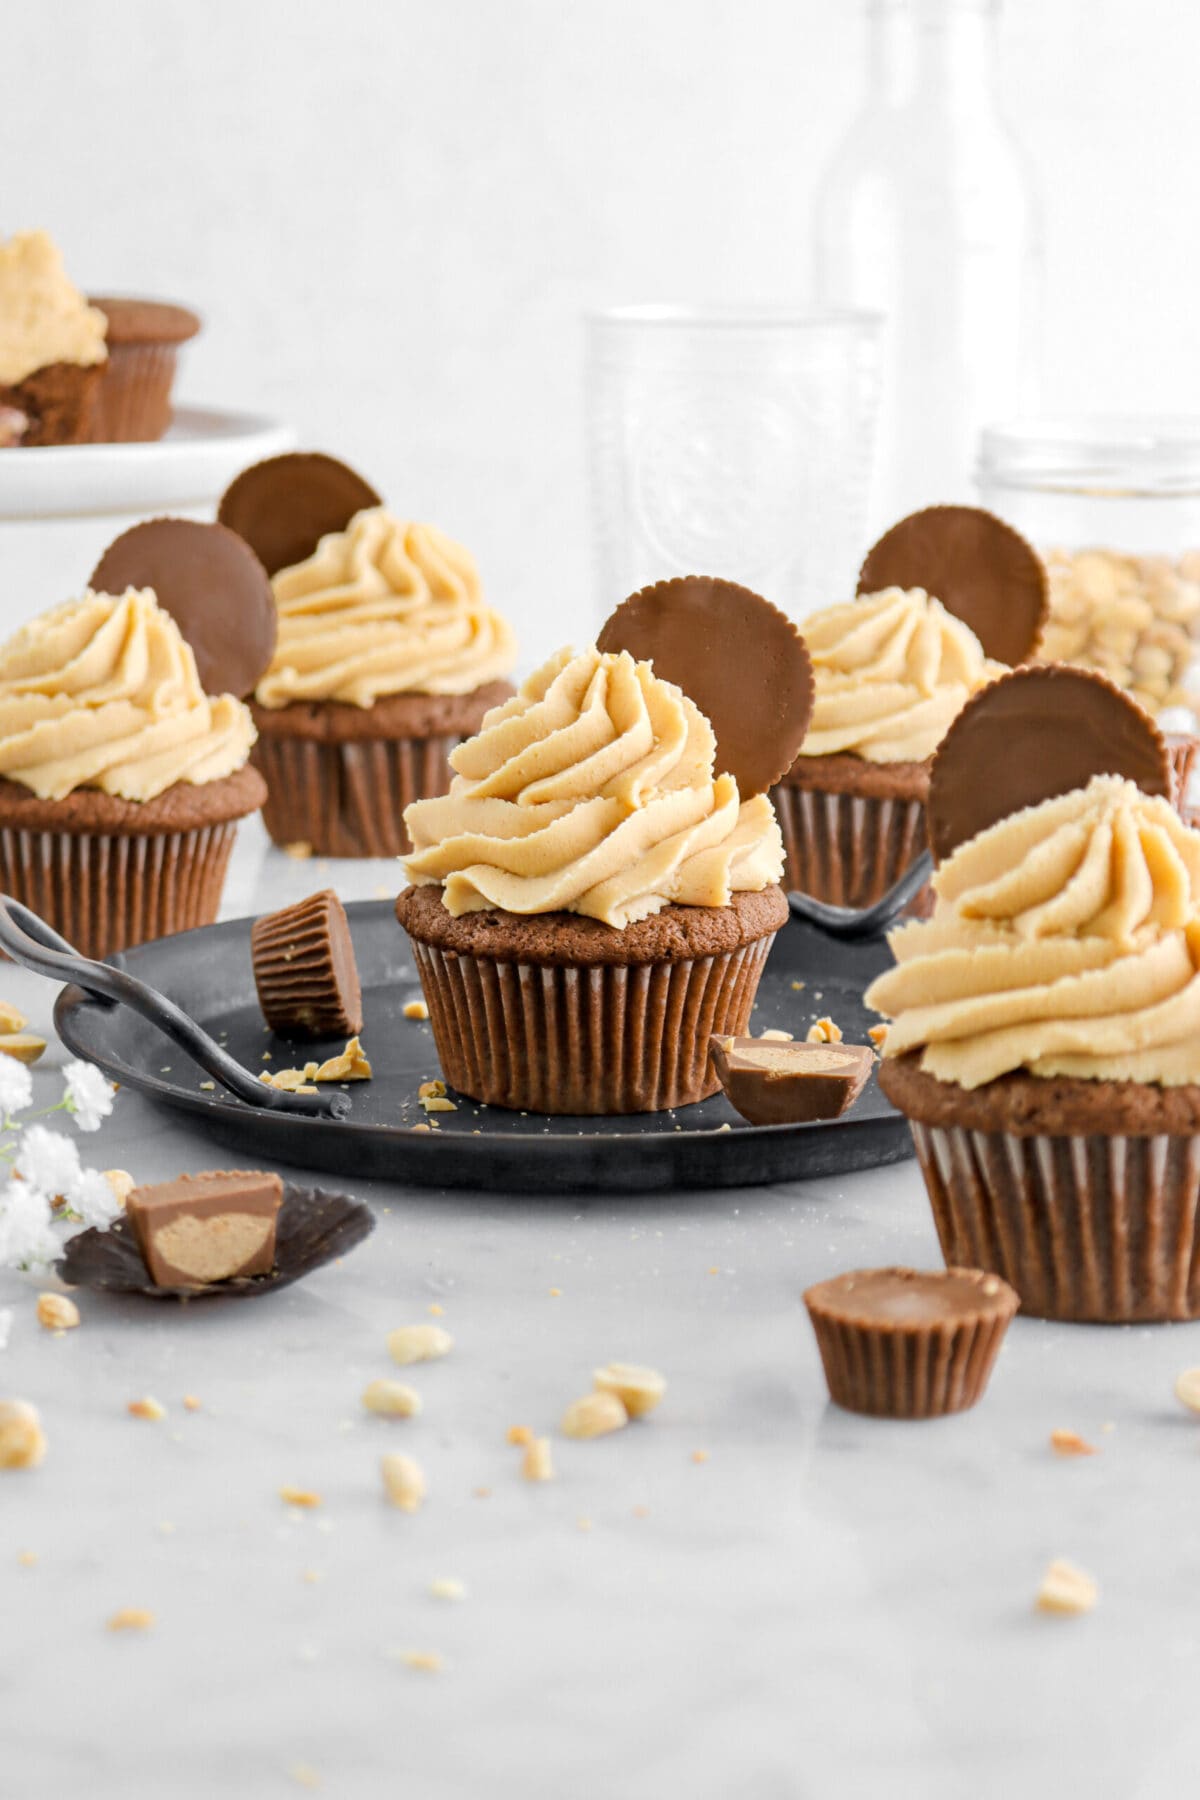 Chocolate Peanut Butter Cup Cupcakes with Peanut Butter Frosting